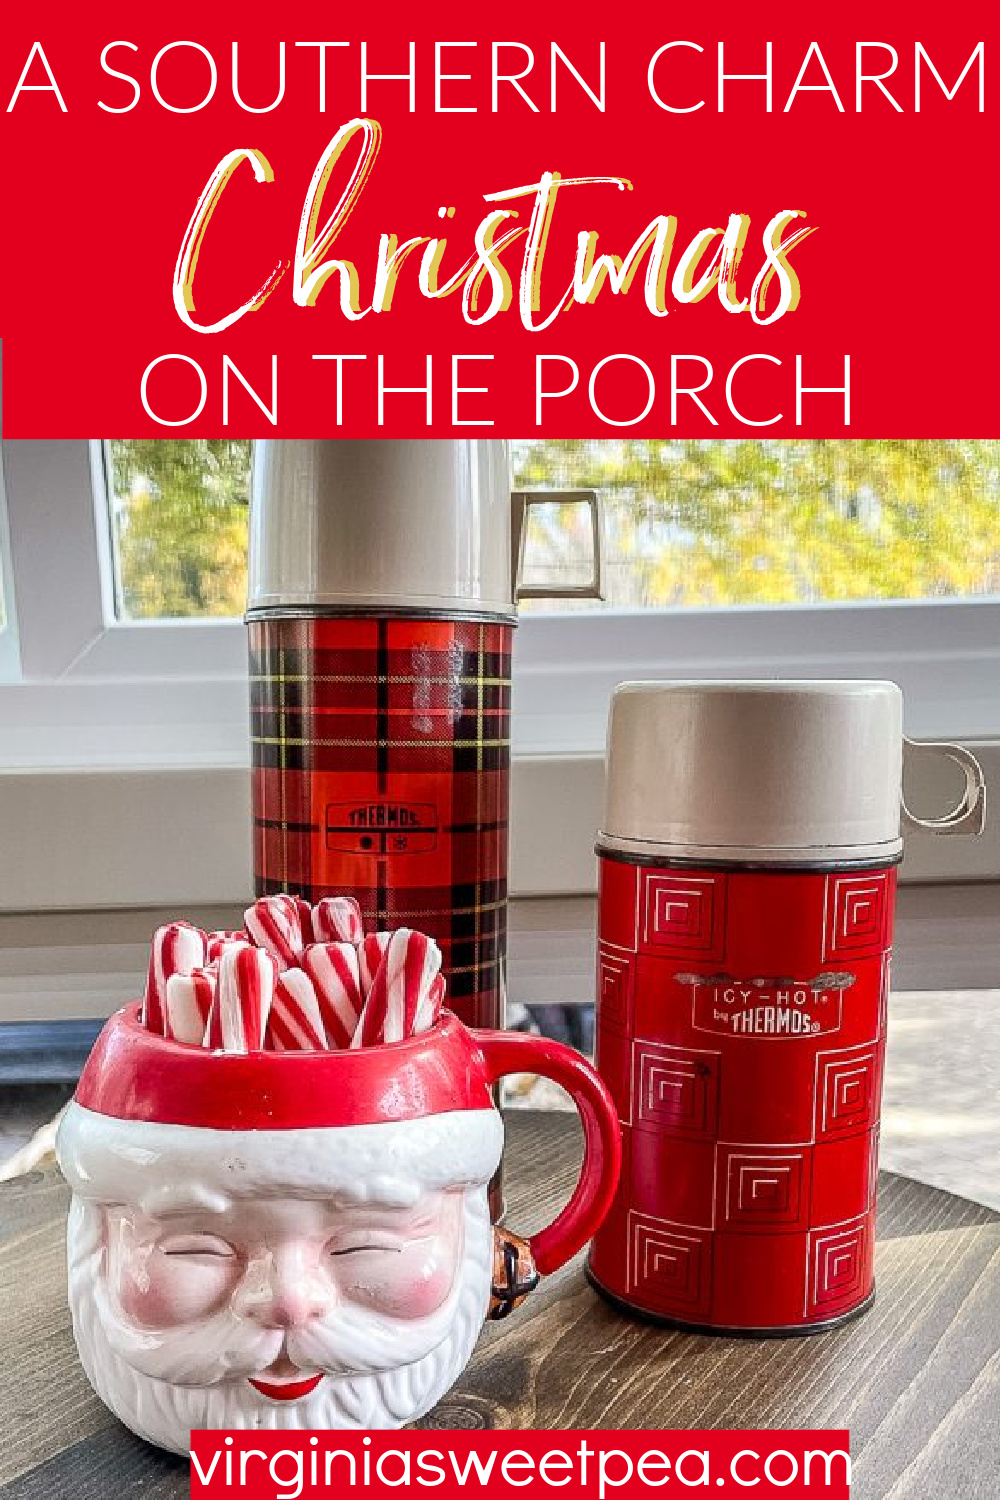 A Southern Charm Christmas on the Porch